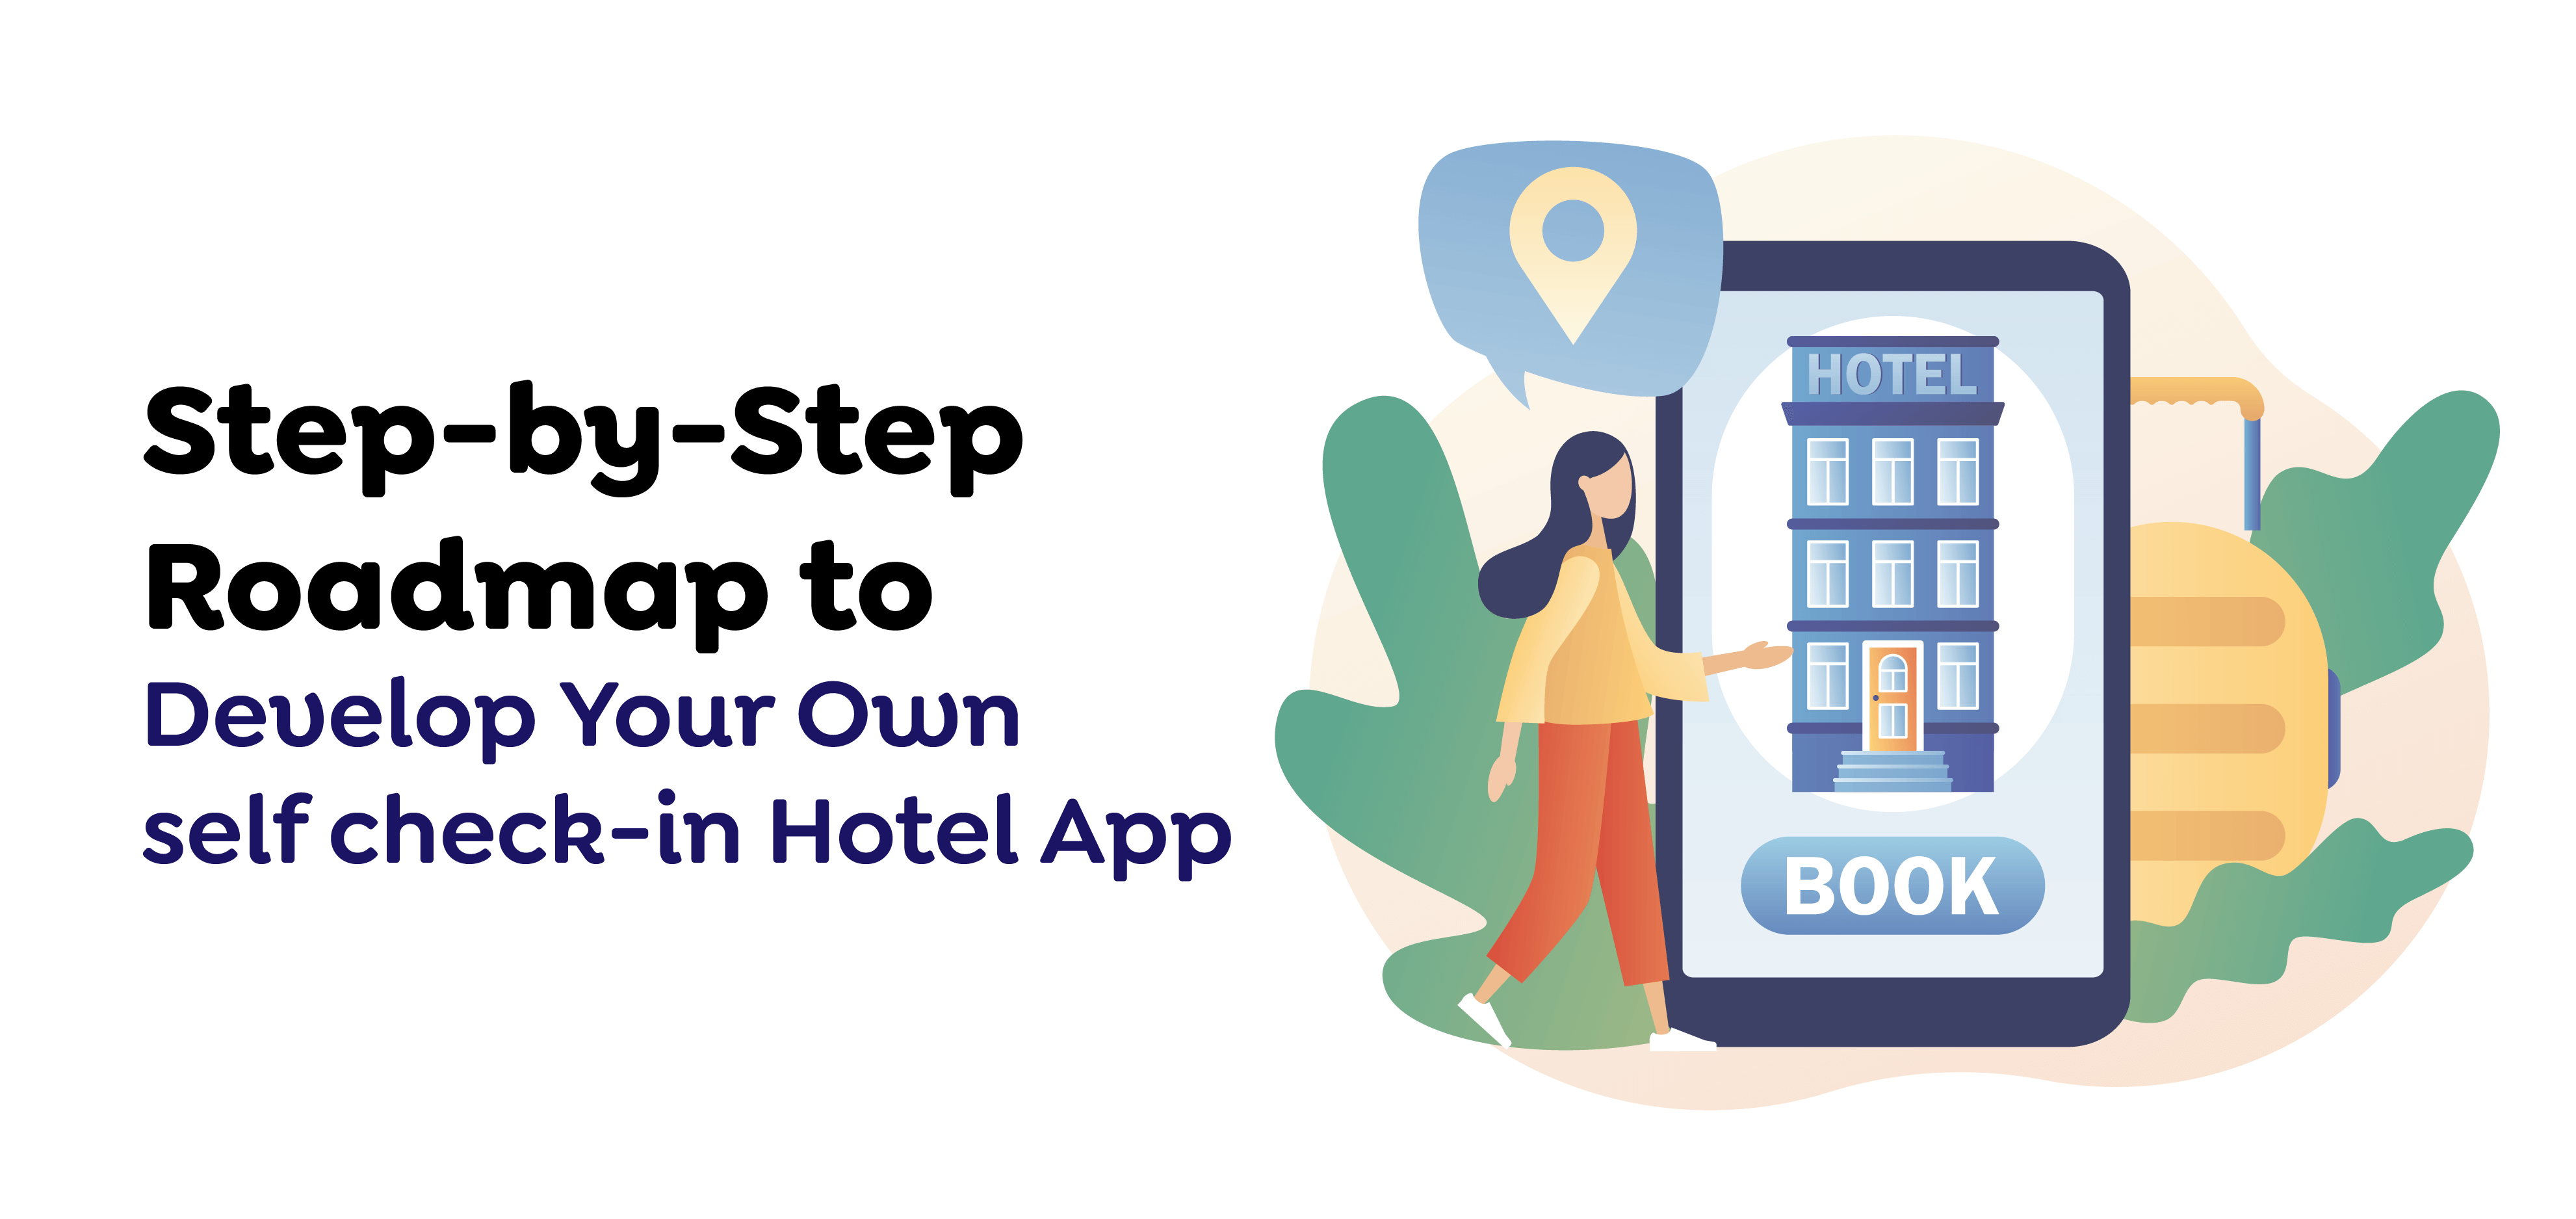 Develop Your self-check-in Hotel App 